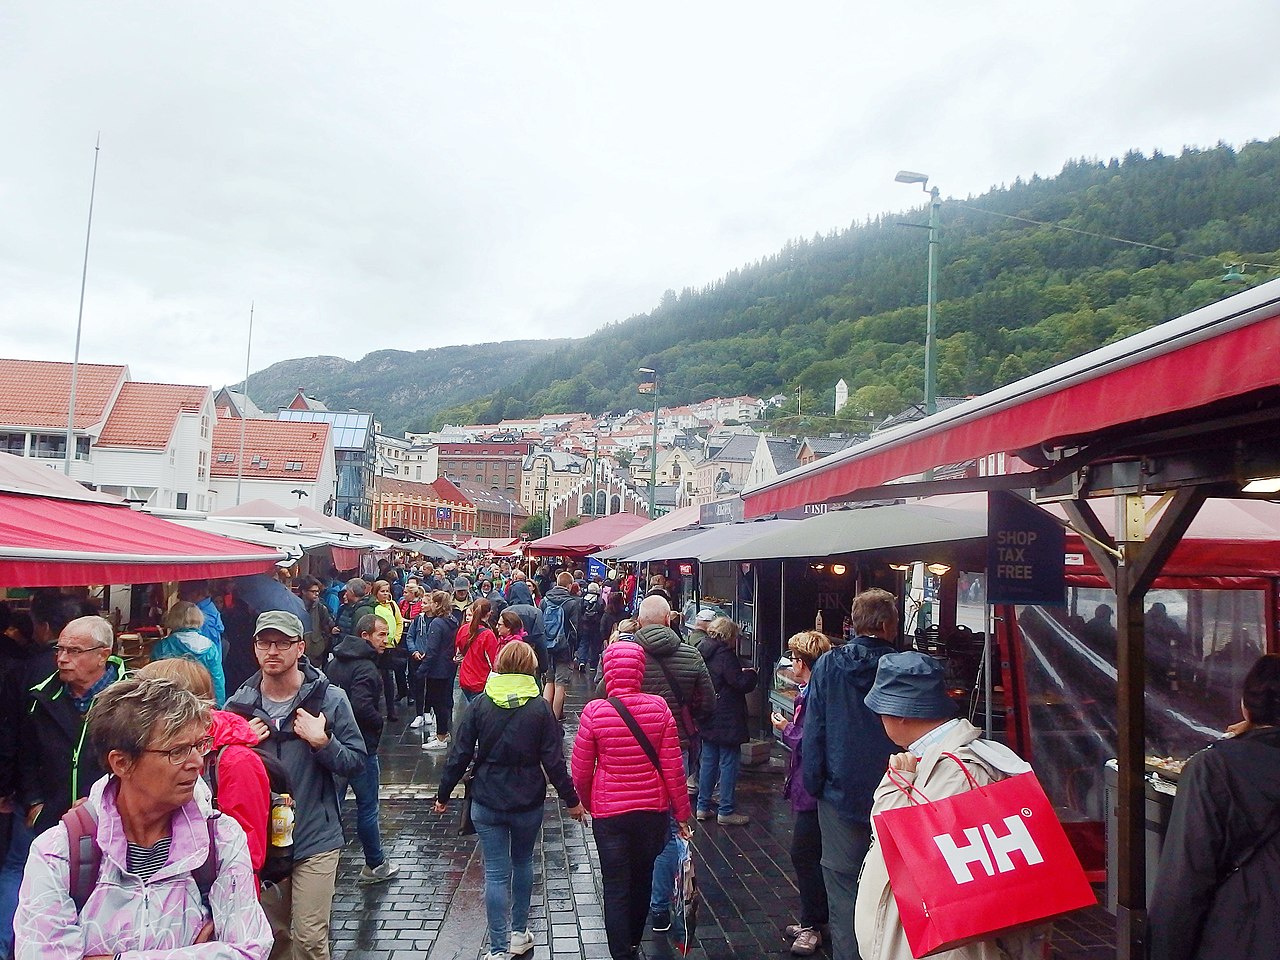 The fish market in Bergen is considered one of the biggest tourist traps in Norway